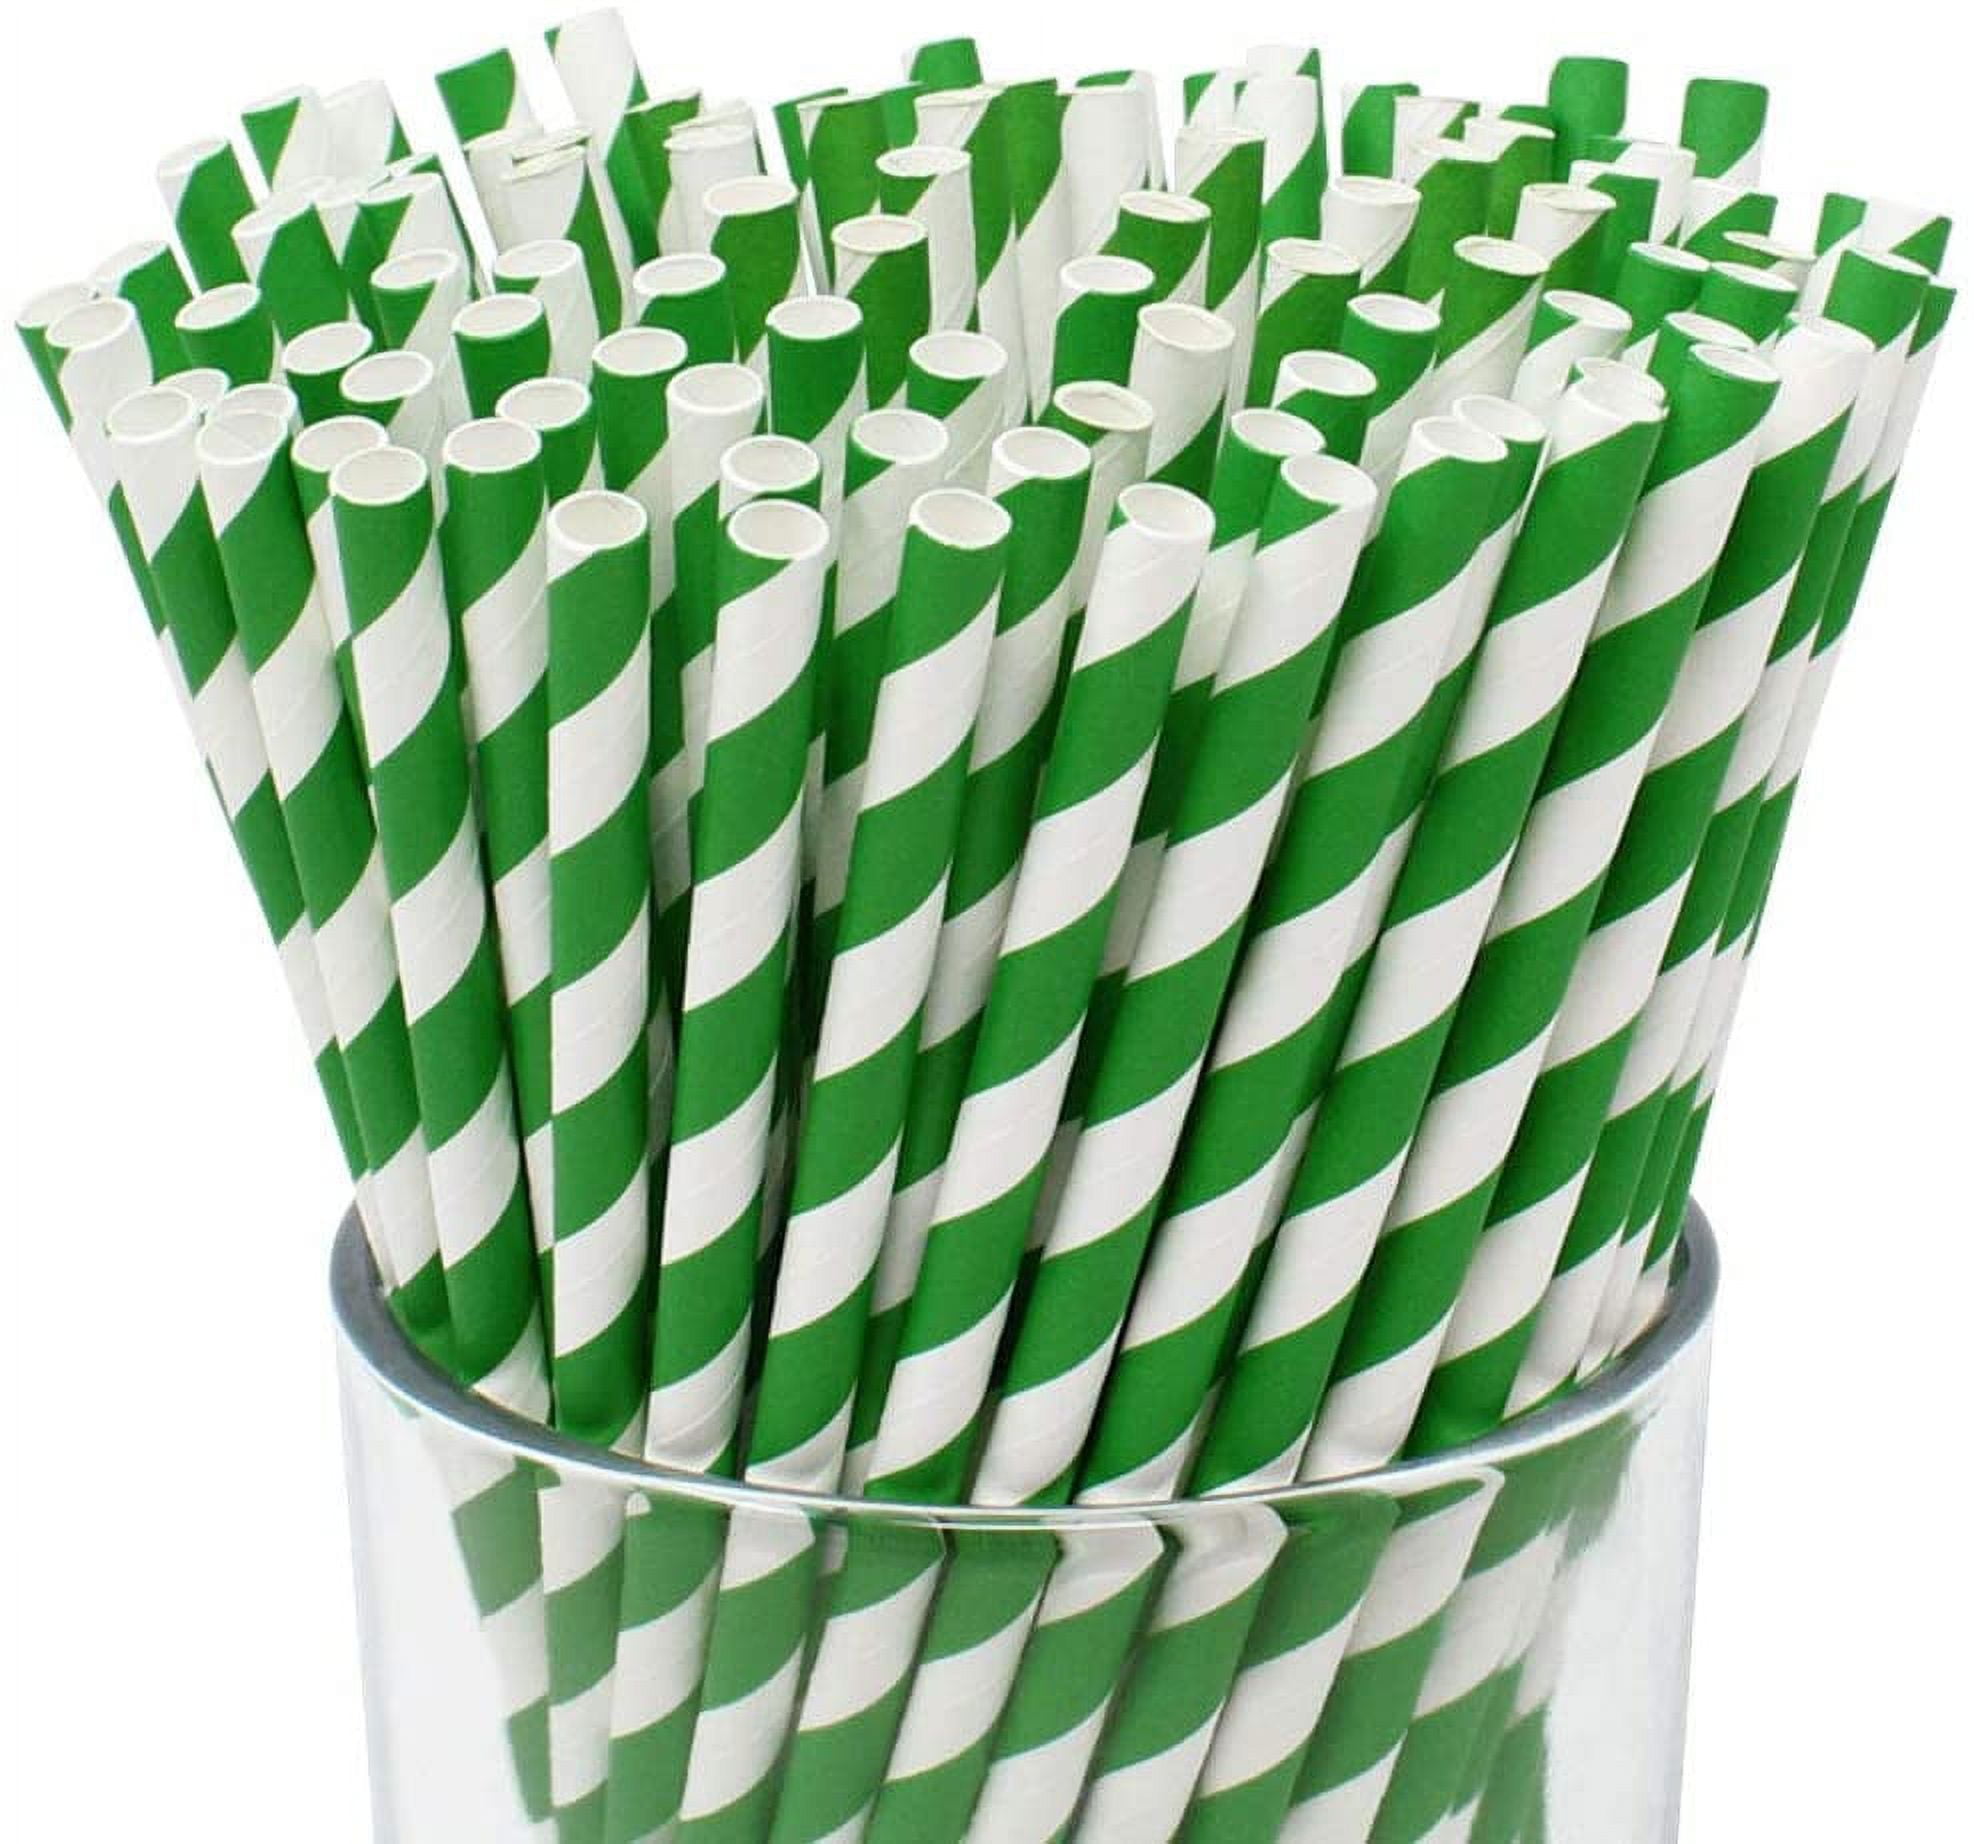 10 Notebook/Lined Paper Straws – Happyfox Supply Co